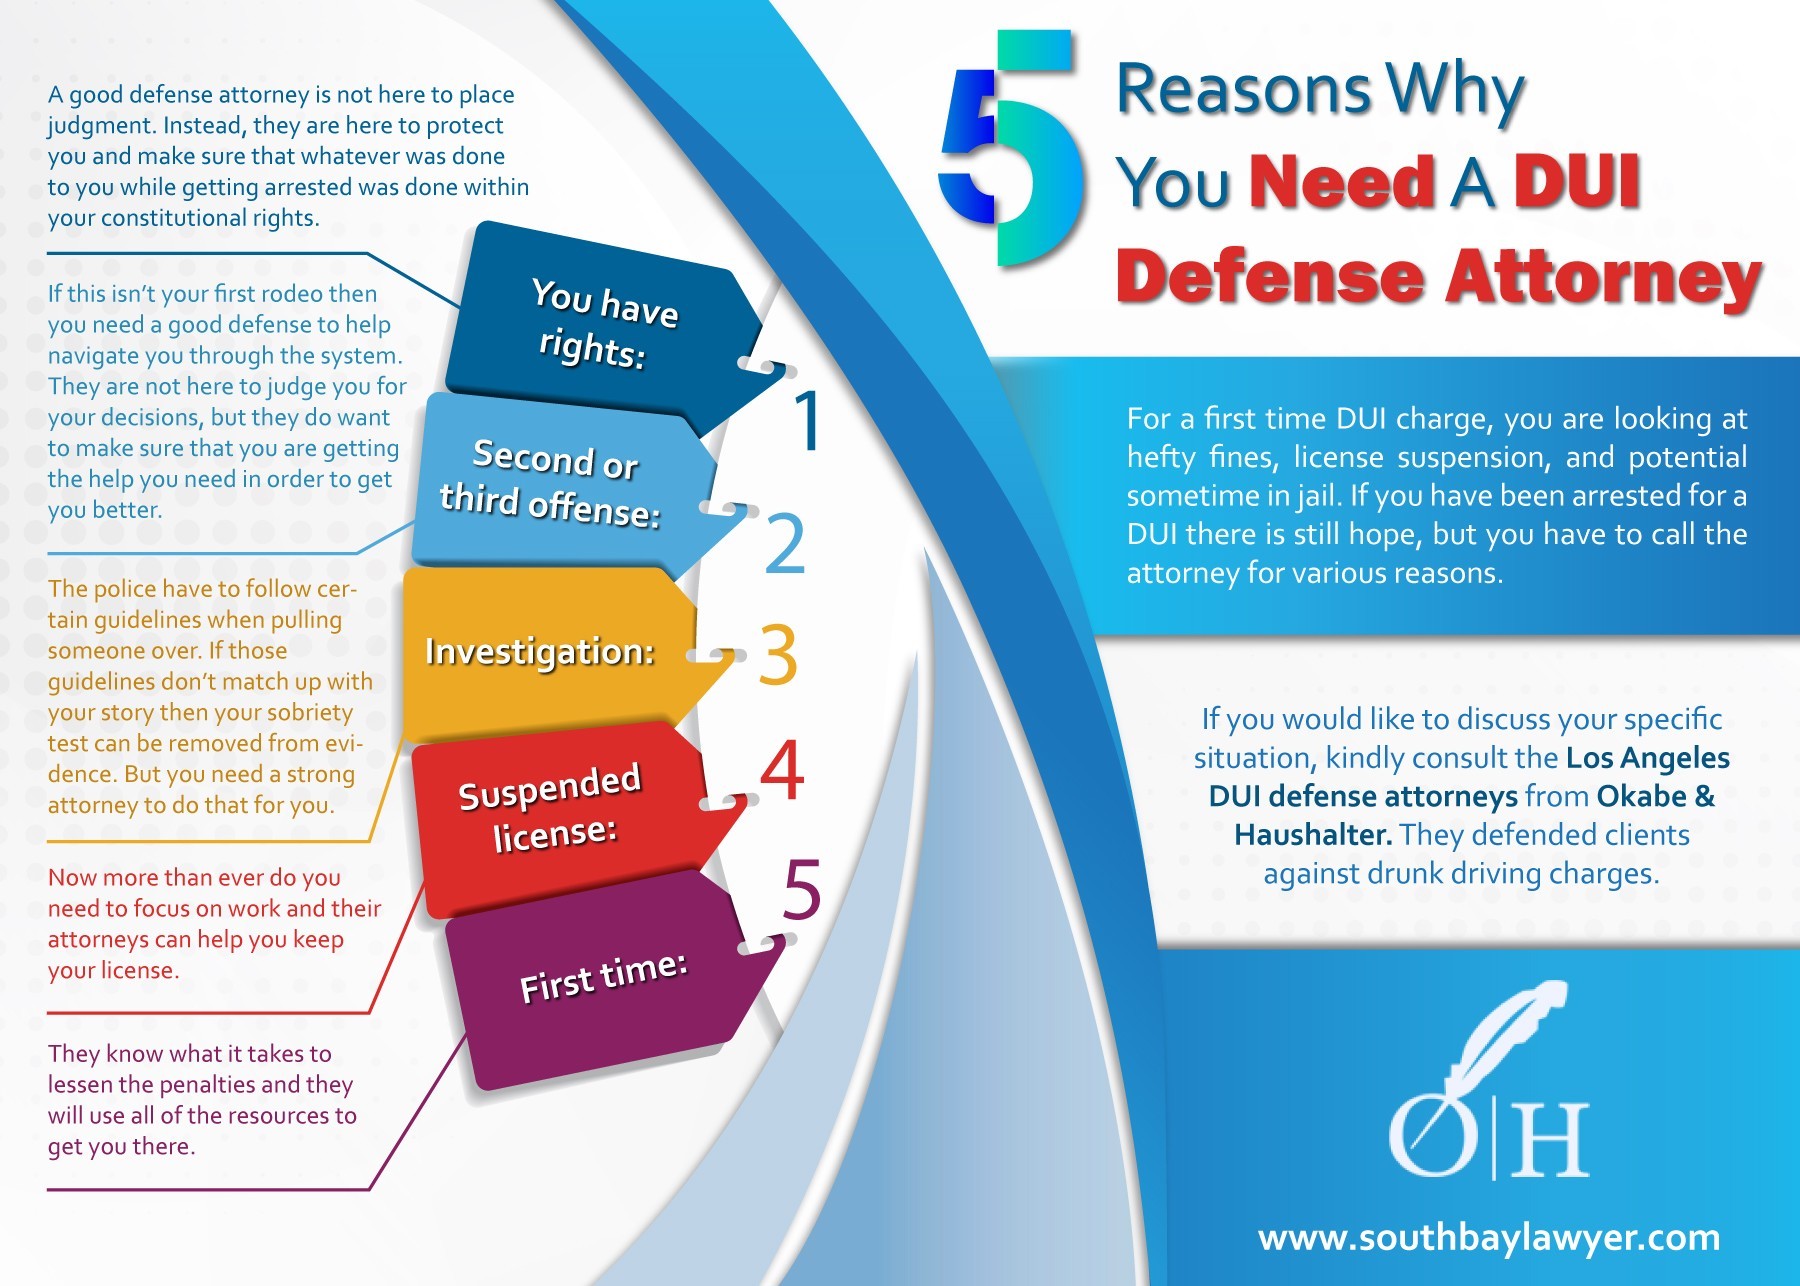 5 Reasons Why You Need A DUI Defense Attorney